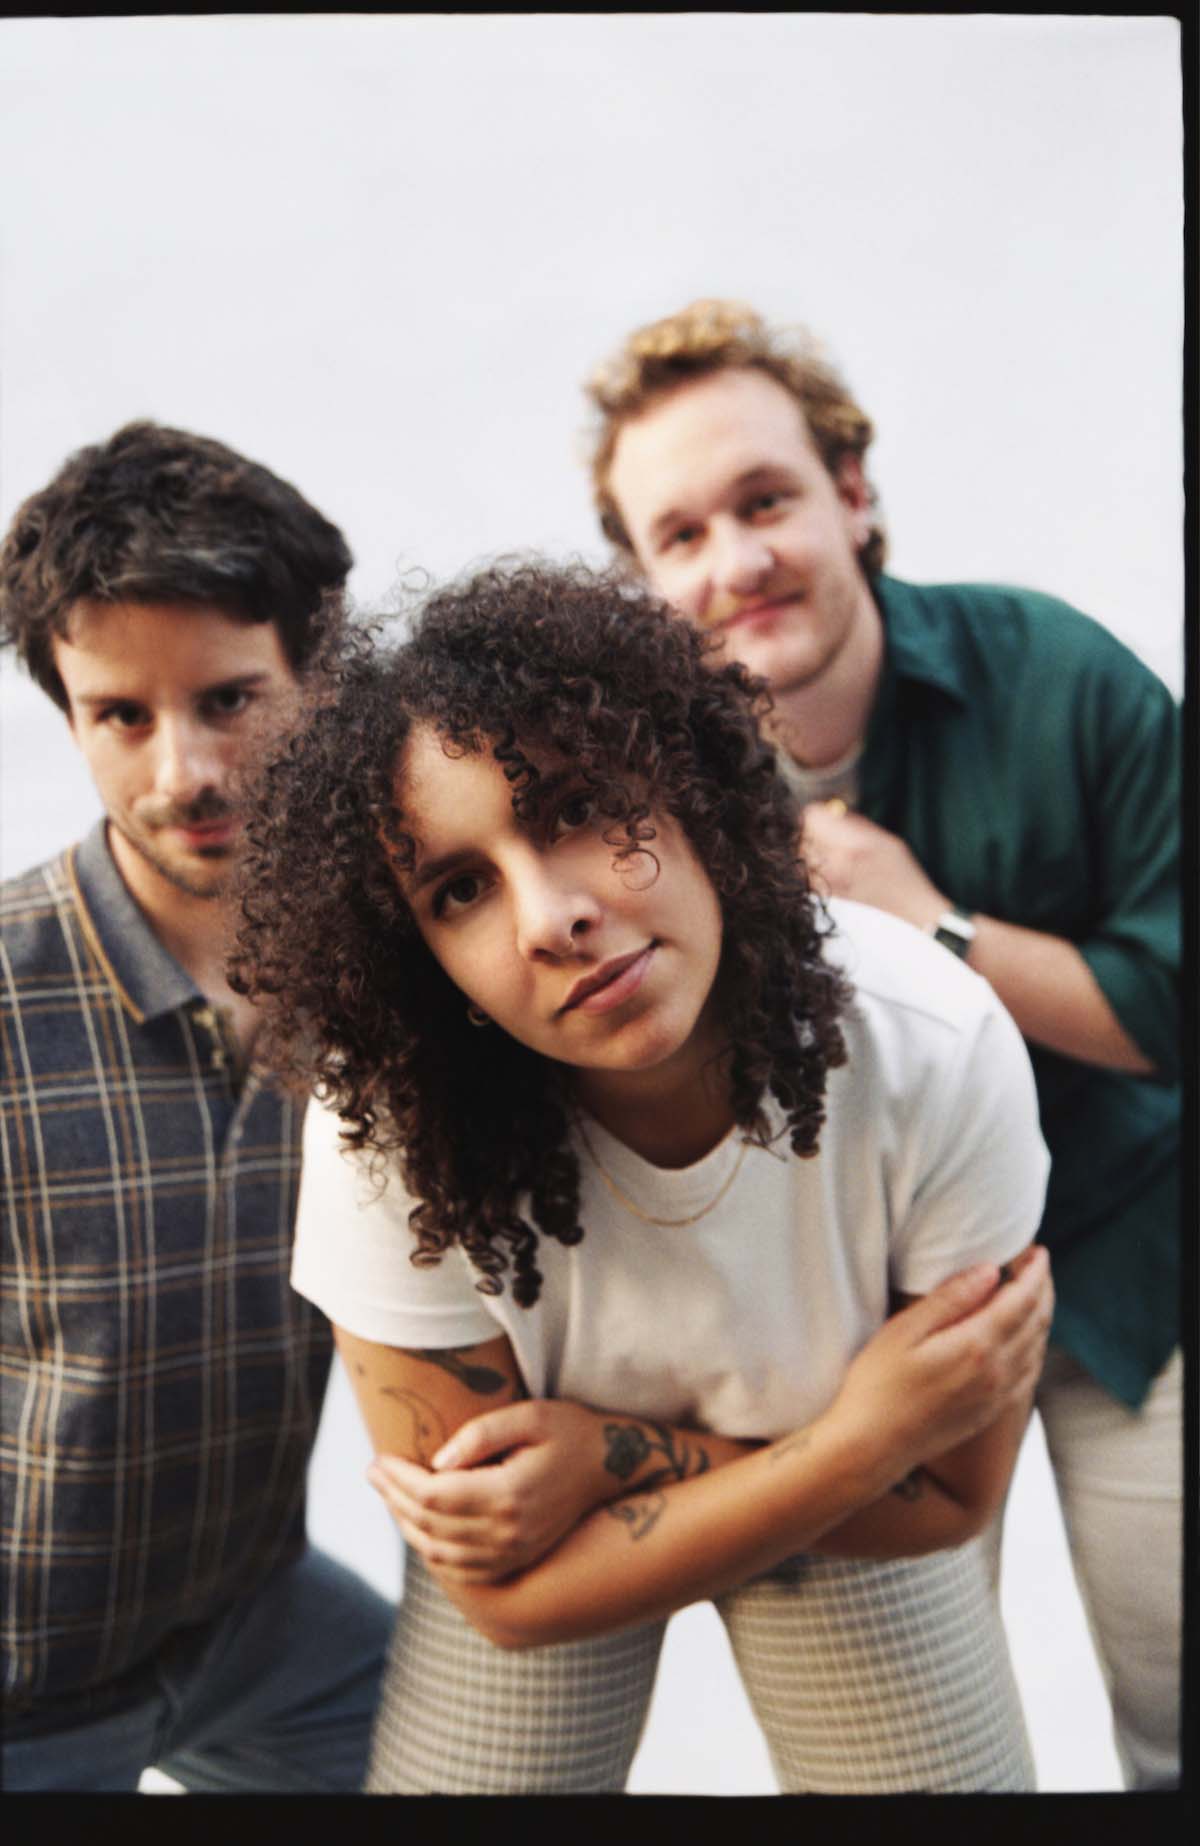 The three members of the band Meagre Martin look kindly into the camera and pose leaning forward. The front woman has dark curly shoulder-length hair, her tattooed arms crossed and is wearing a white T-shirt and light-coloured cloth trousers. Behind her on the left, a white man with a three-day beard, brown hair and a checked polo shirt looks past her. On the right, even further in the background and rather out of focus, a white man with reddish curls, a three-day beard and a dark green shirt can be seen.